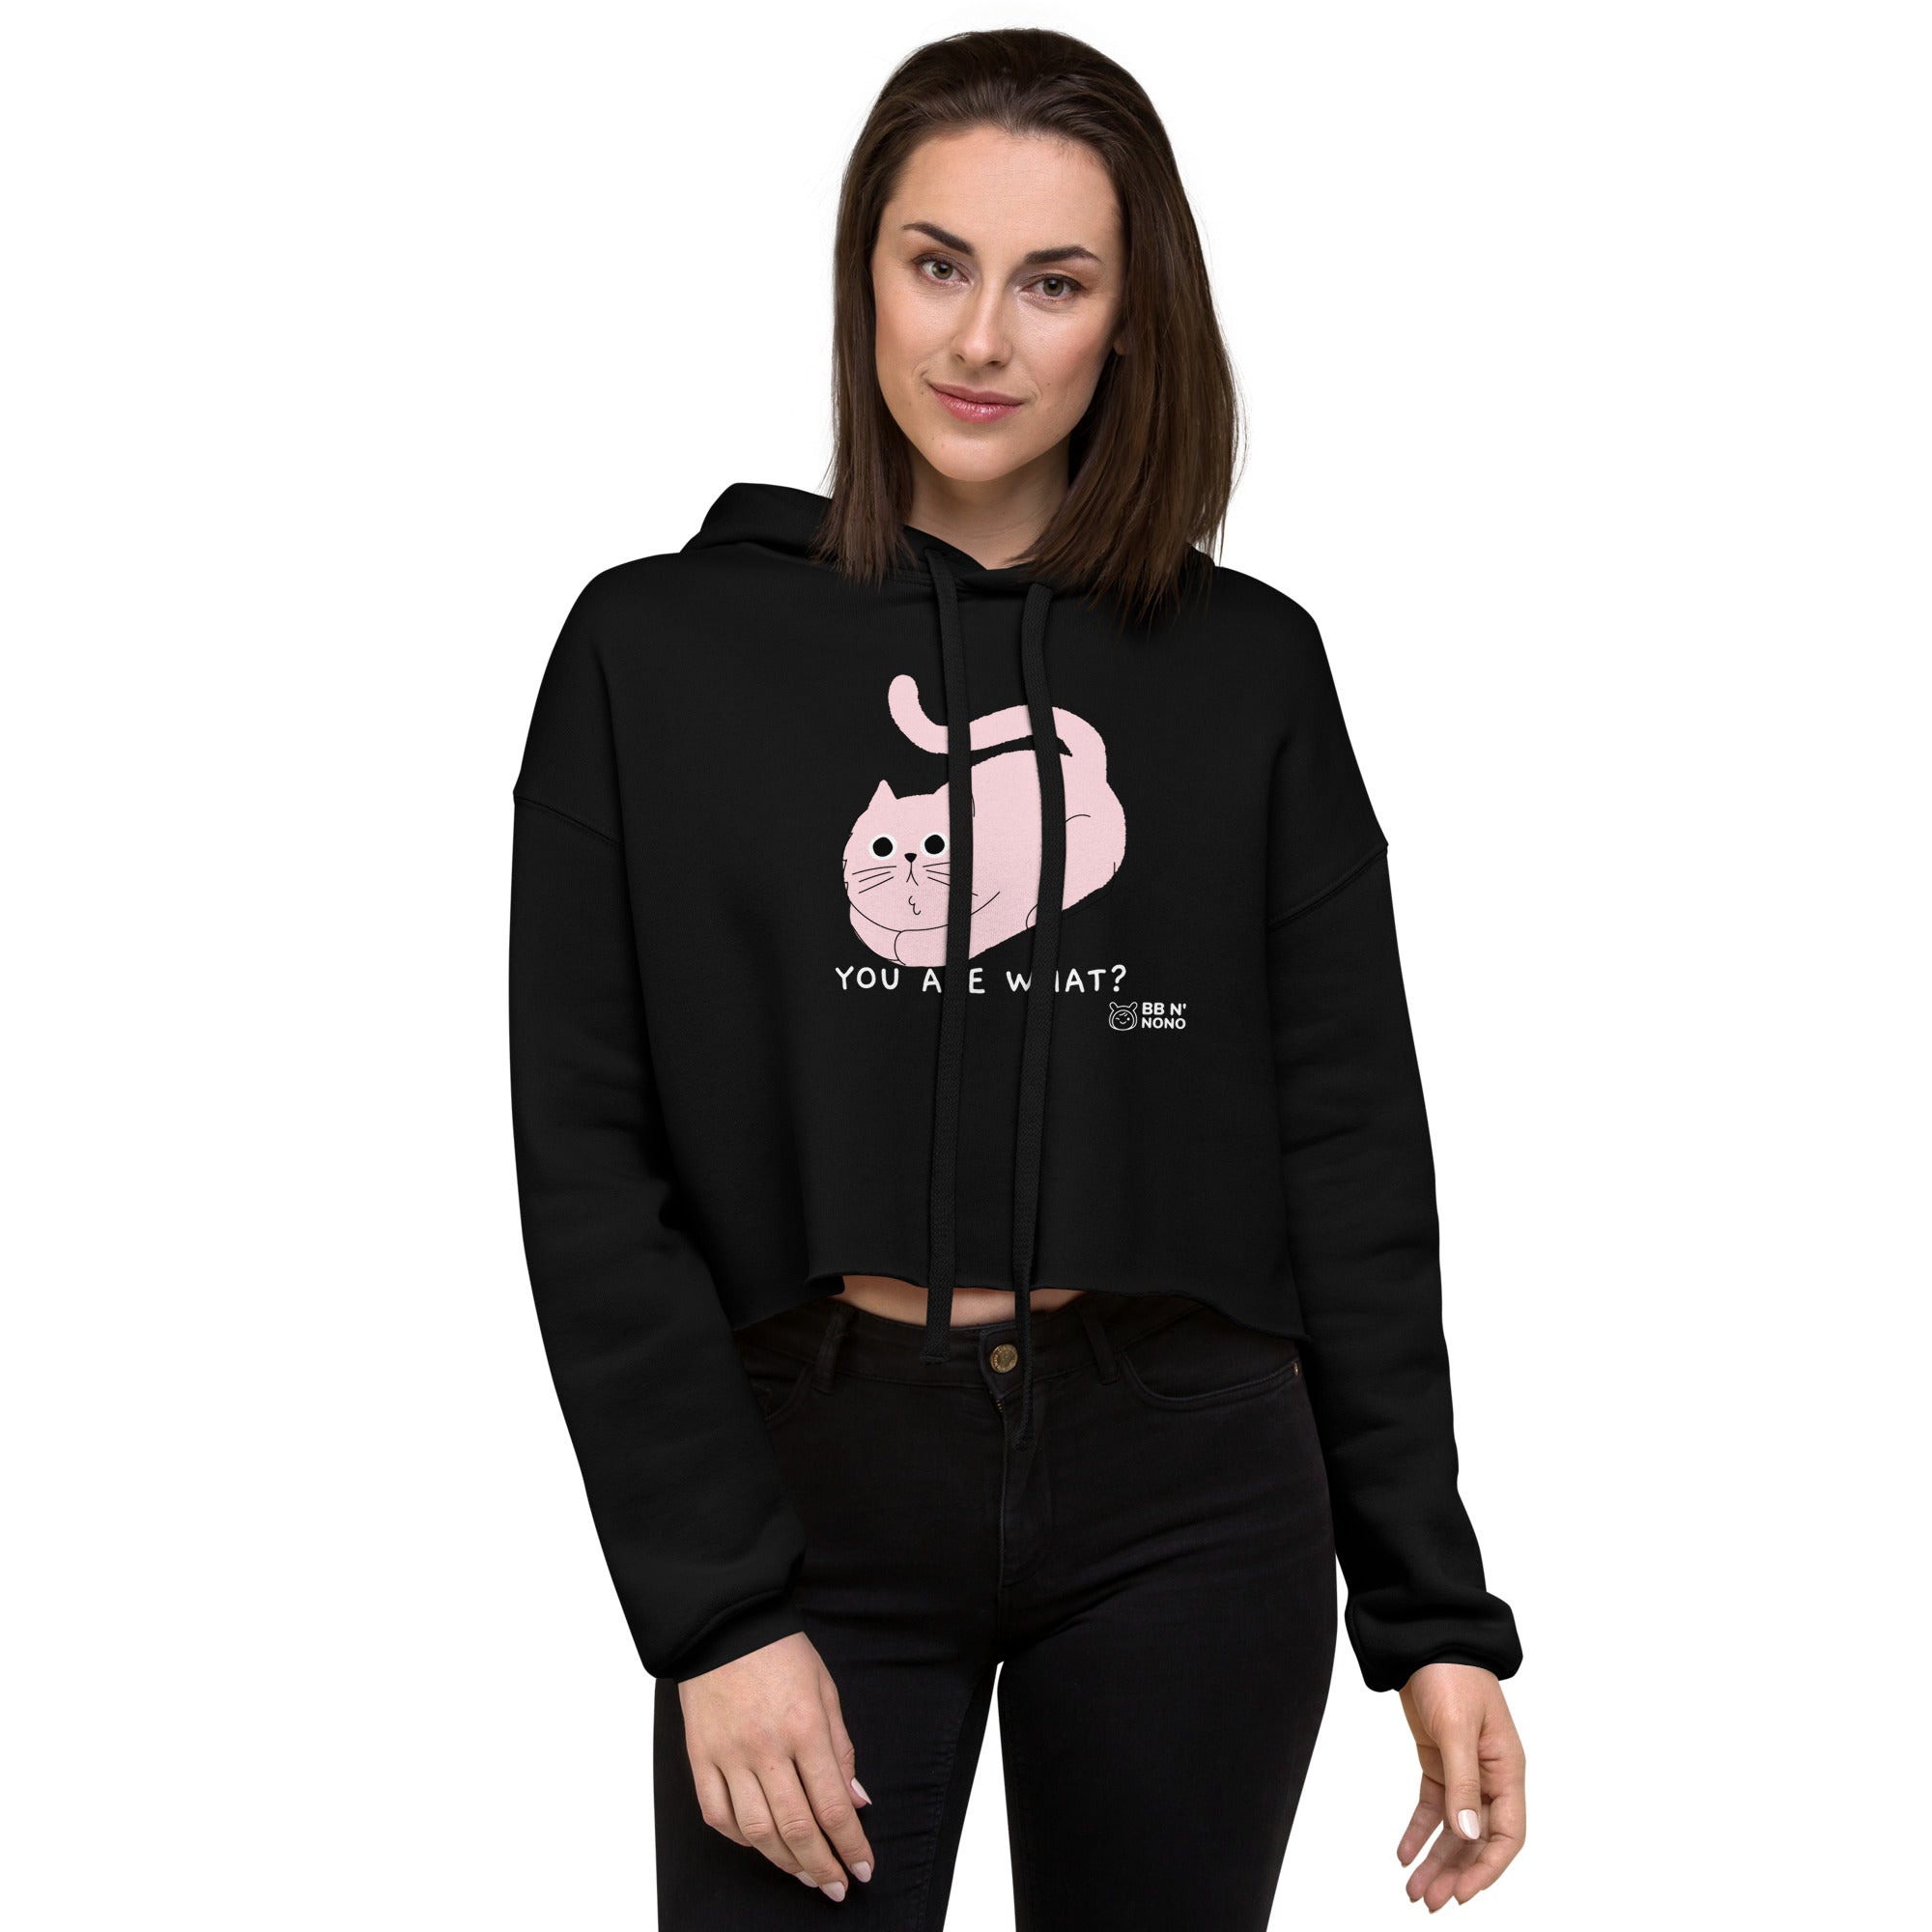 You are what? - Crop Hoodie